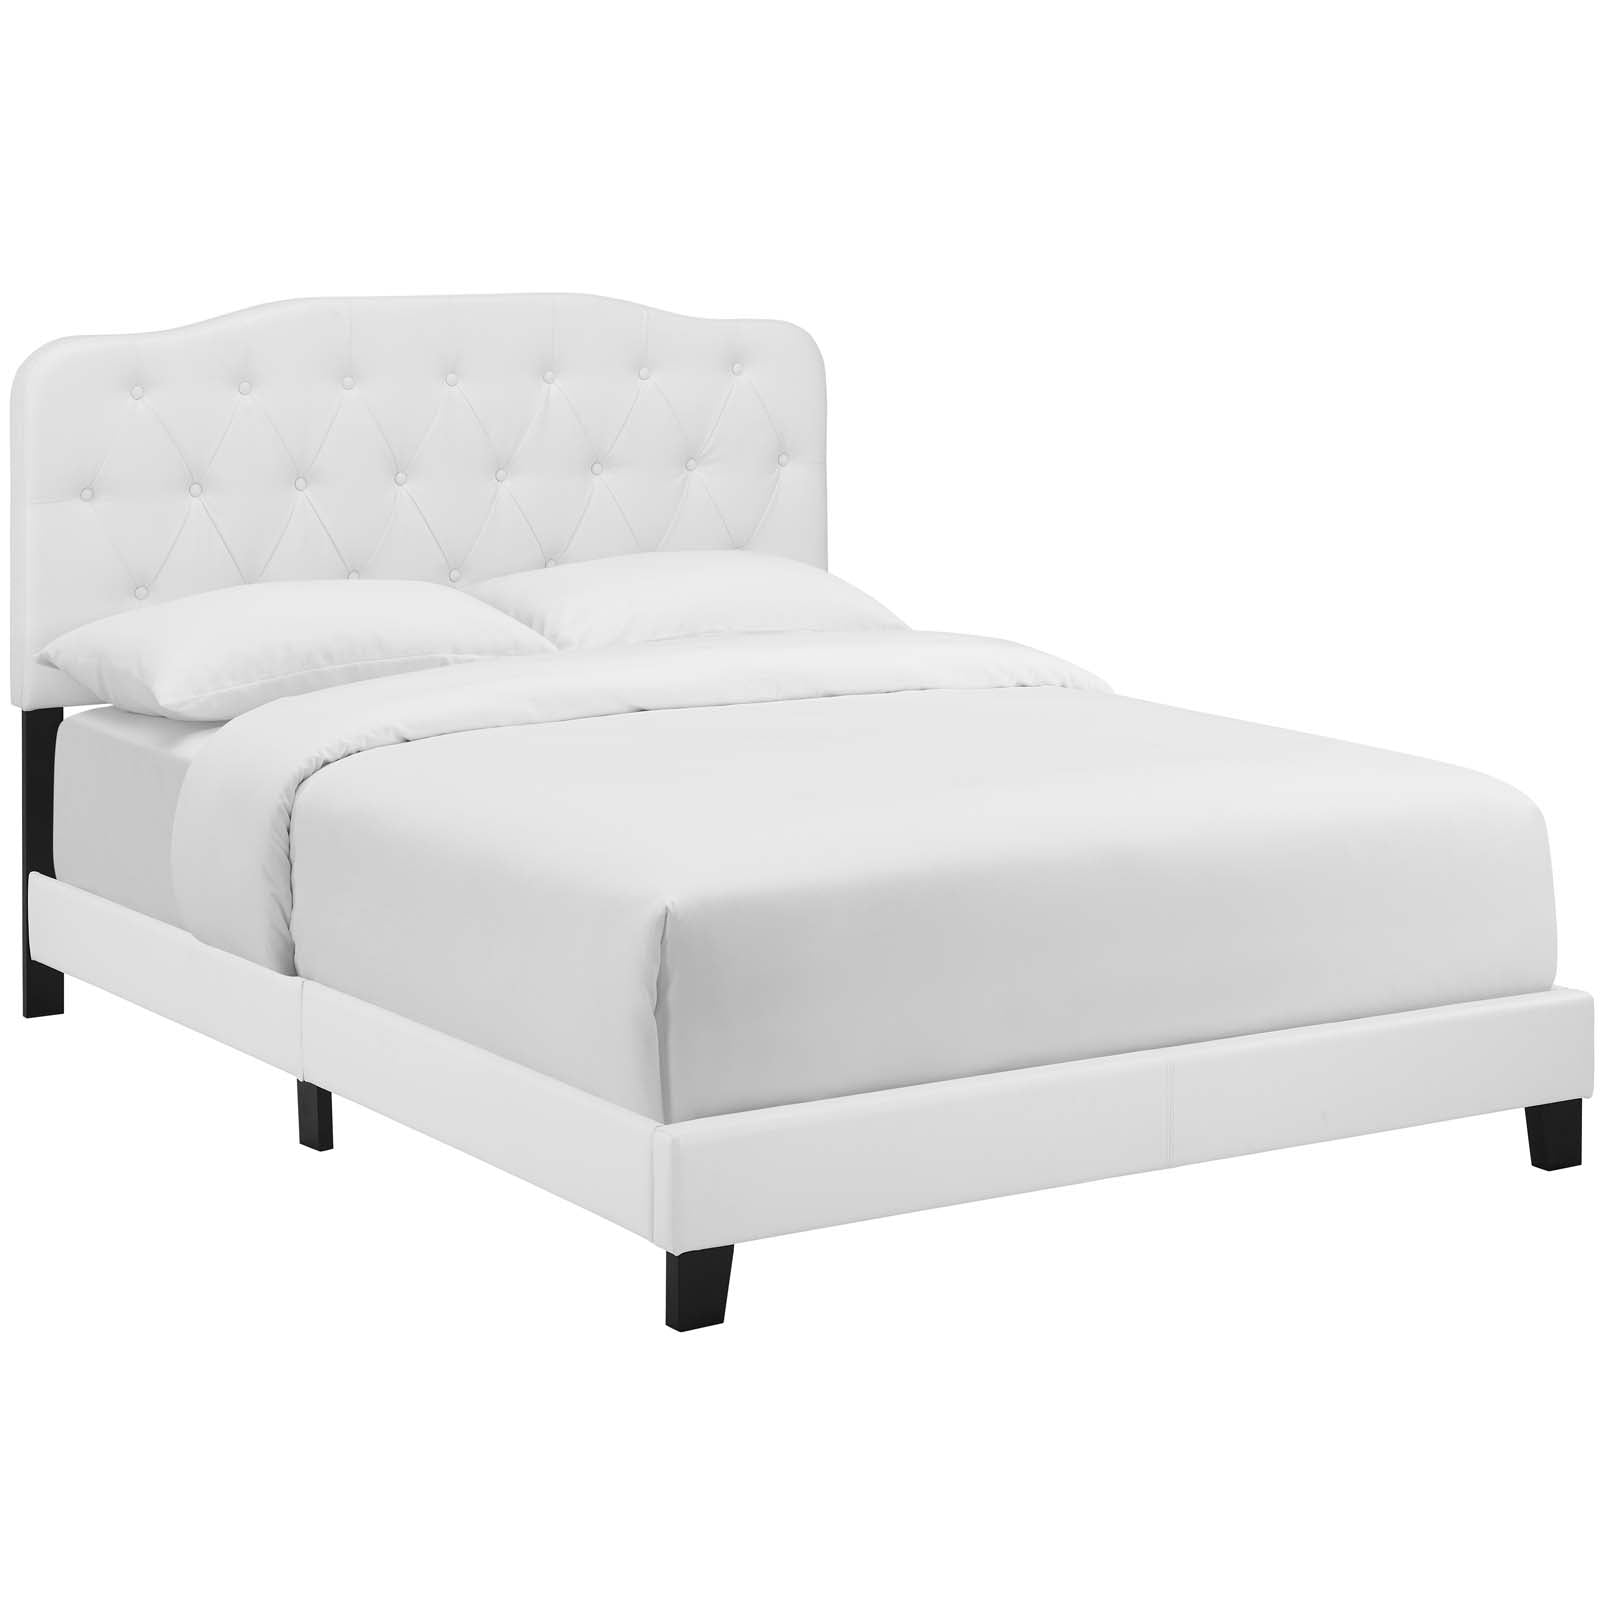 Modway Beds - Amelia Twin Faux Leather Bed White